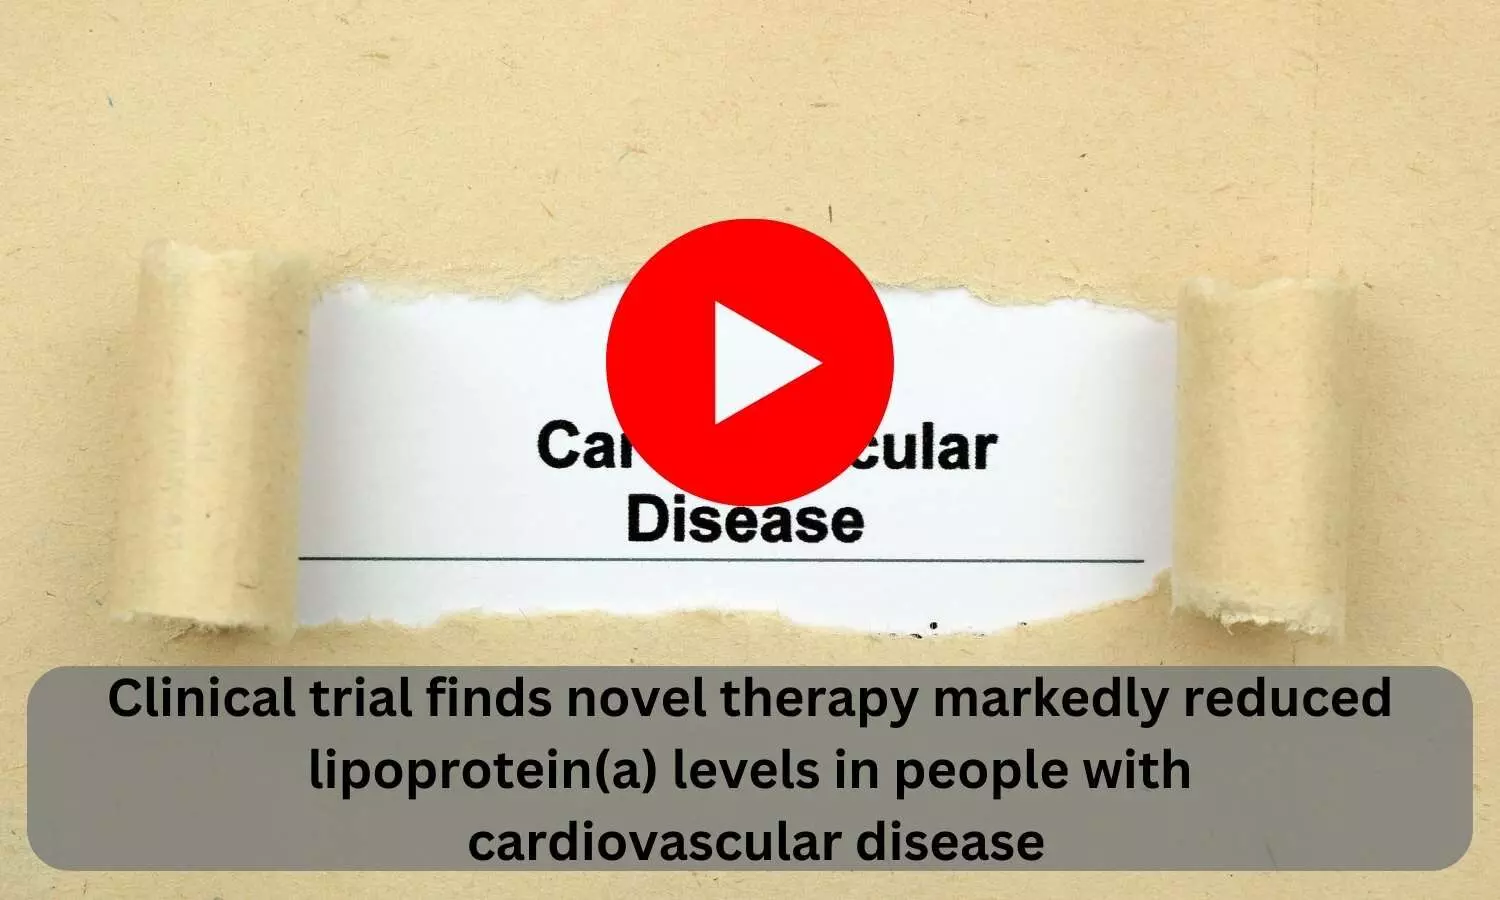 Clinical trial finds novel therapy markedly reduced lipoprotein(a) levels in people with cardiovascular disease